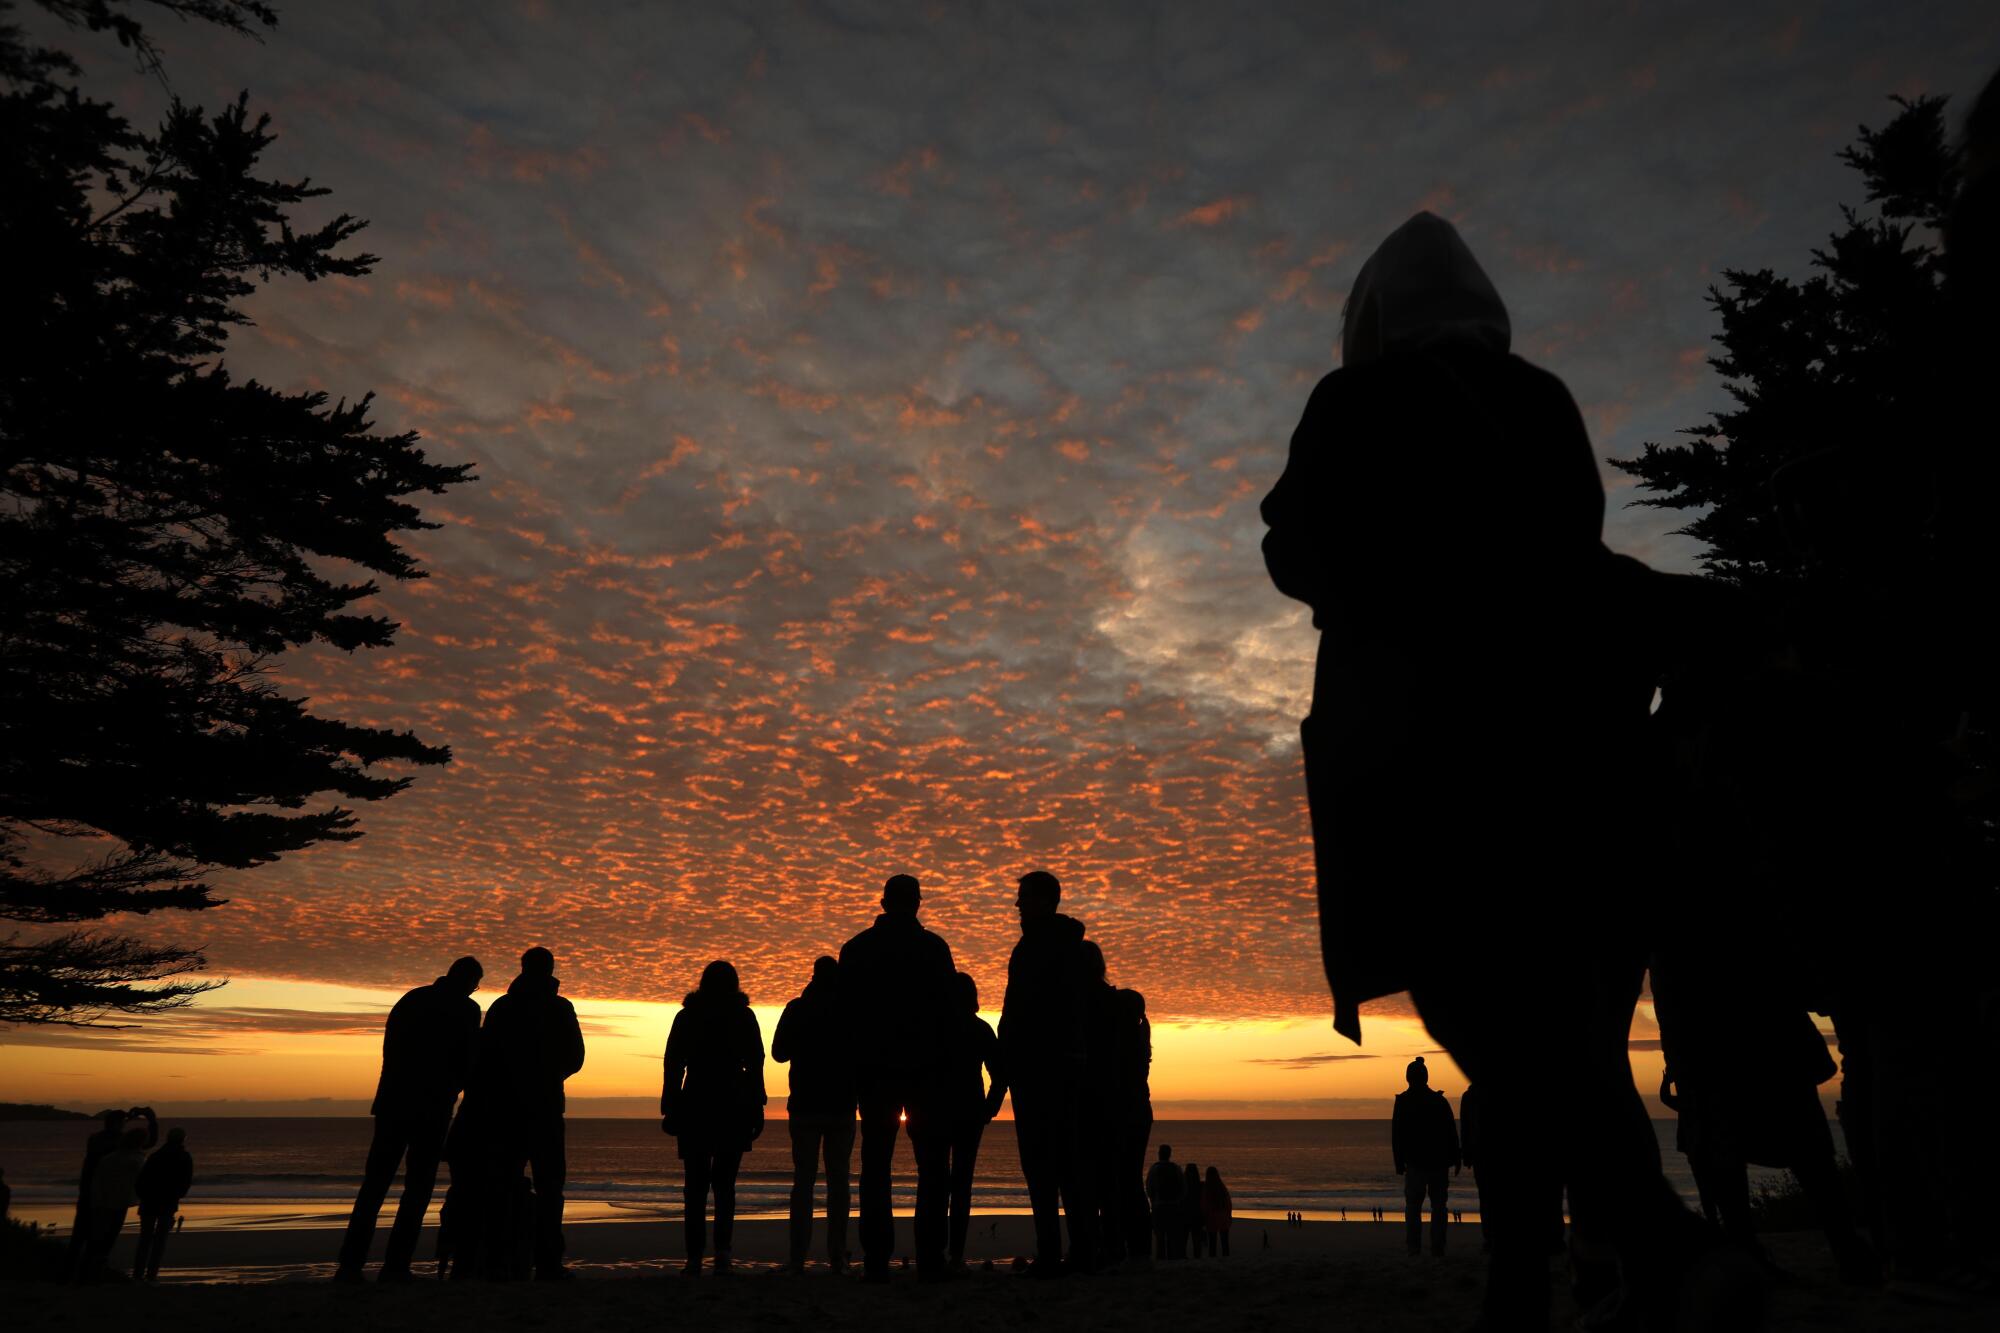 People watch the sunset where Ocean Avenue meets the Pacific Ocean in Carmel-by-the-Sea.